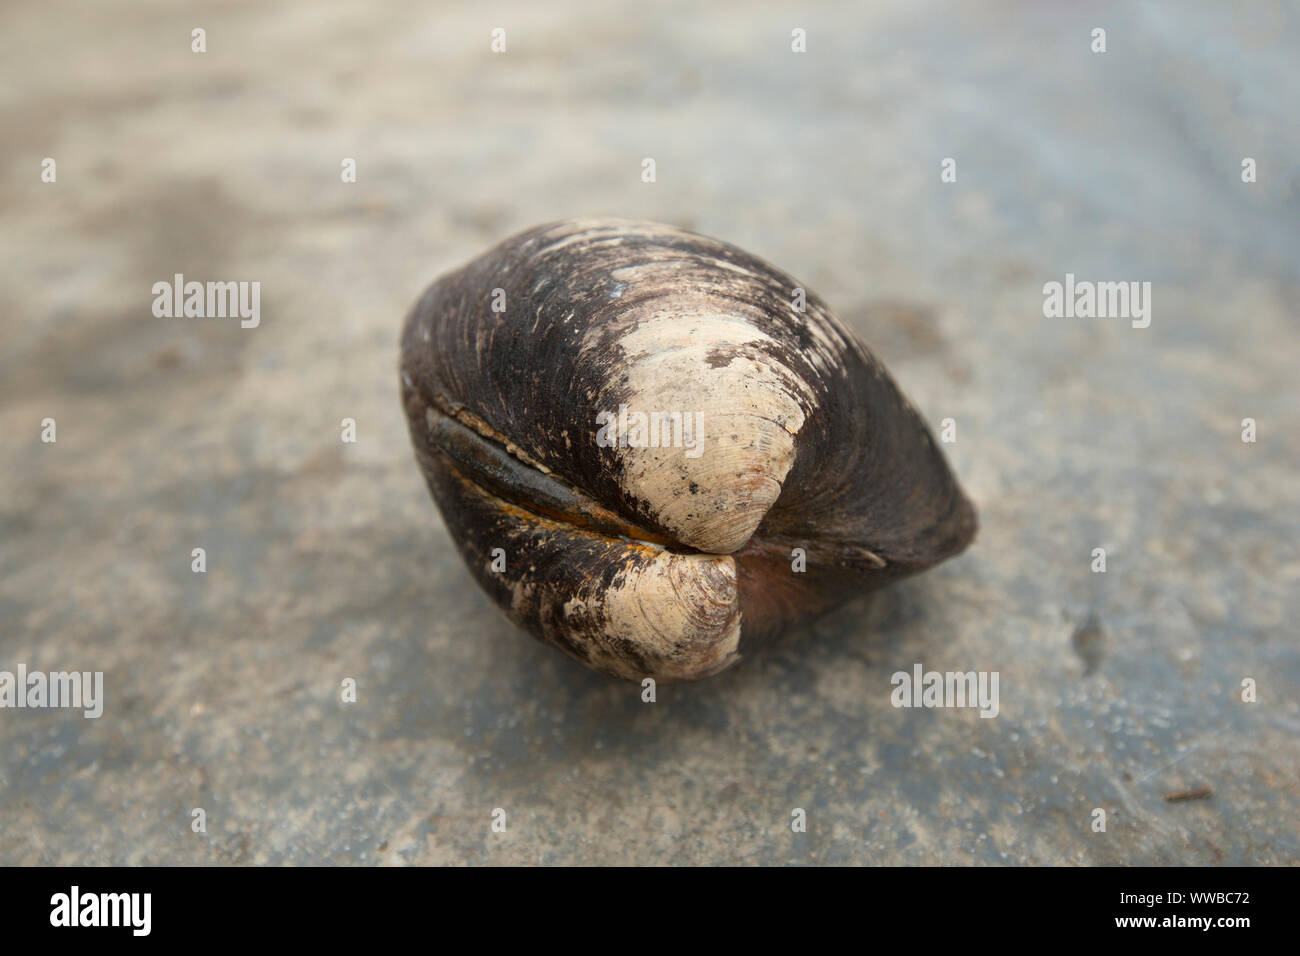 An Icelandic cyprine clam, Arctica islandica,  found in the English Channel. The Icelandic cyprine is one of the longest living organisms on Earth wit Stock Photo